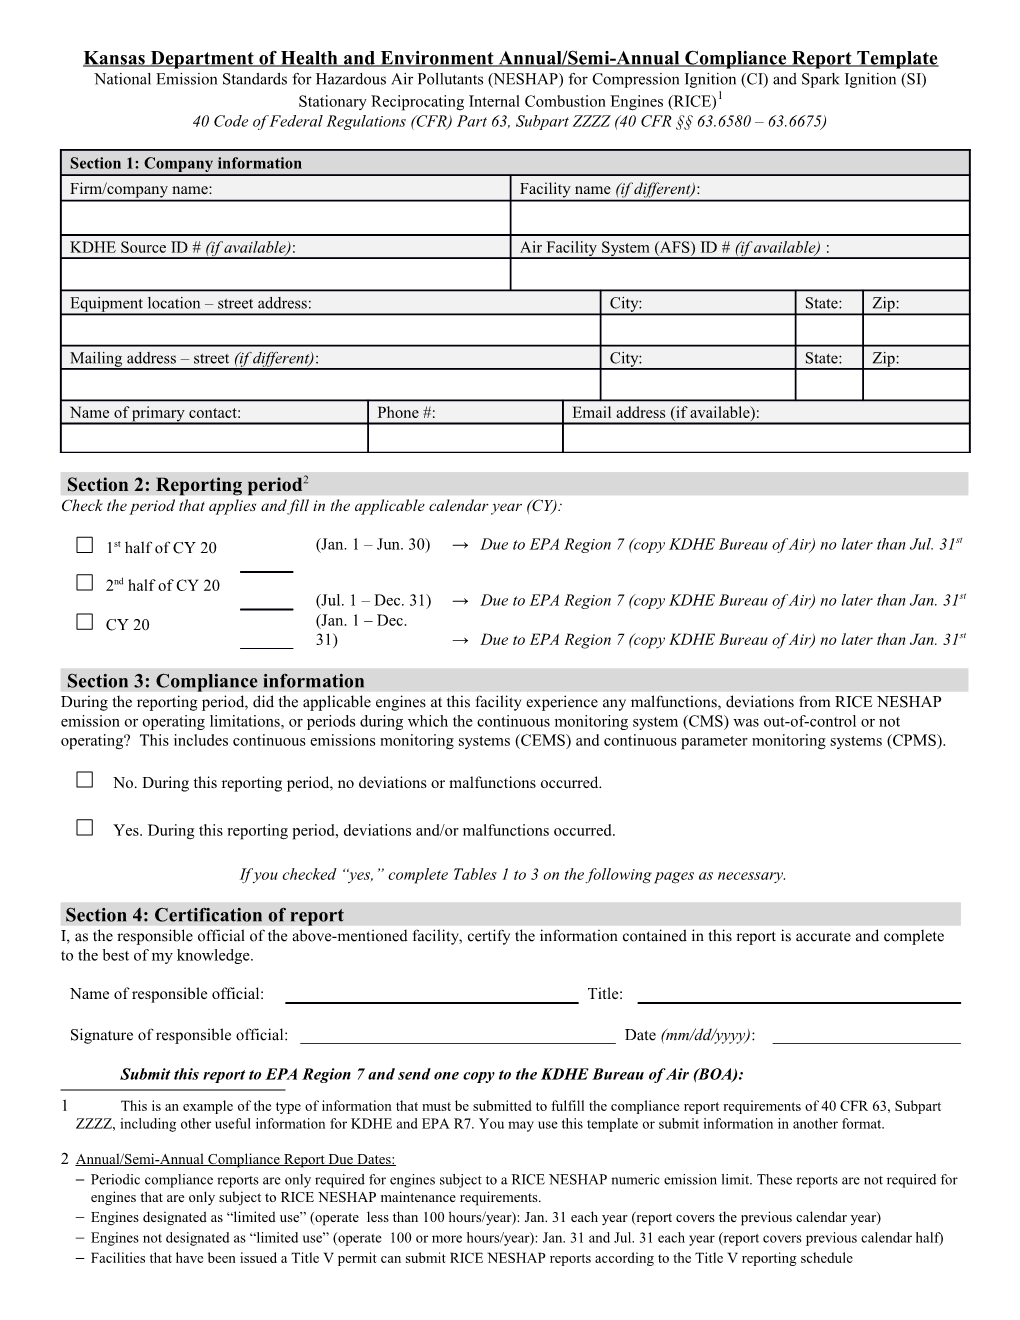 Kansas Department of Health and Environment Annual/Semi-Annual Compliance Report Template